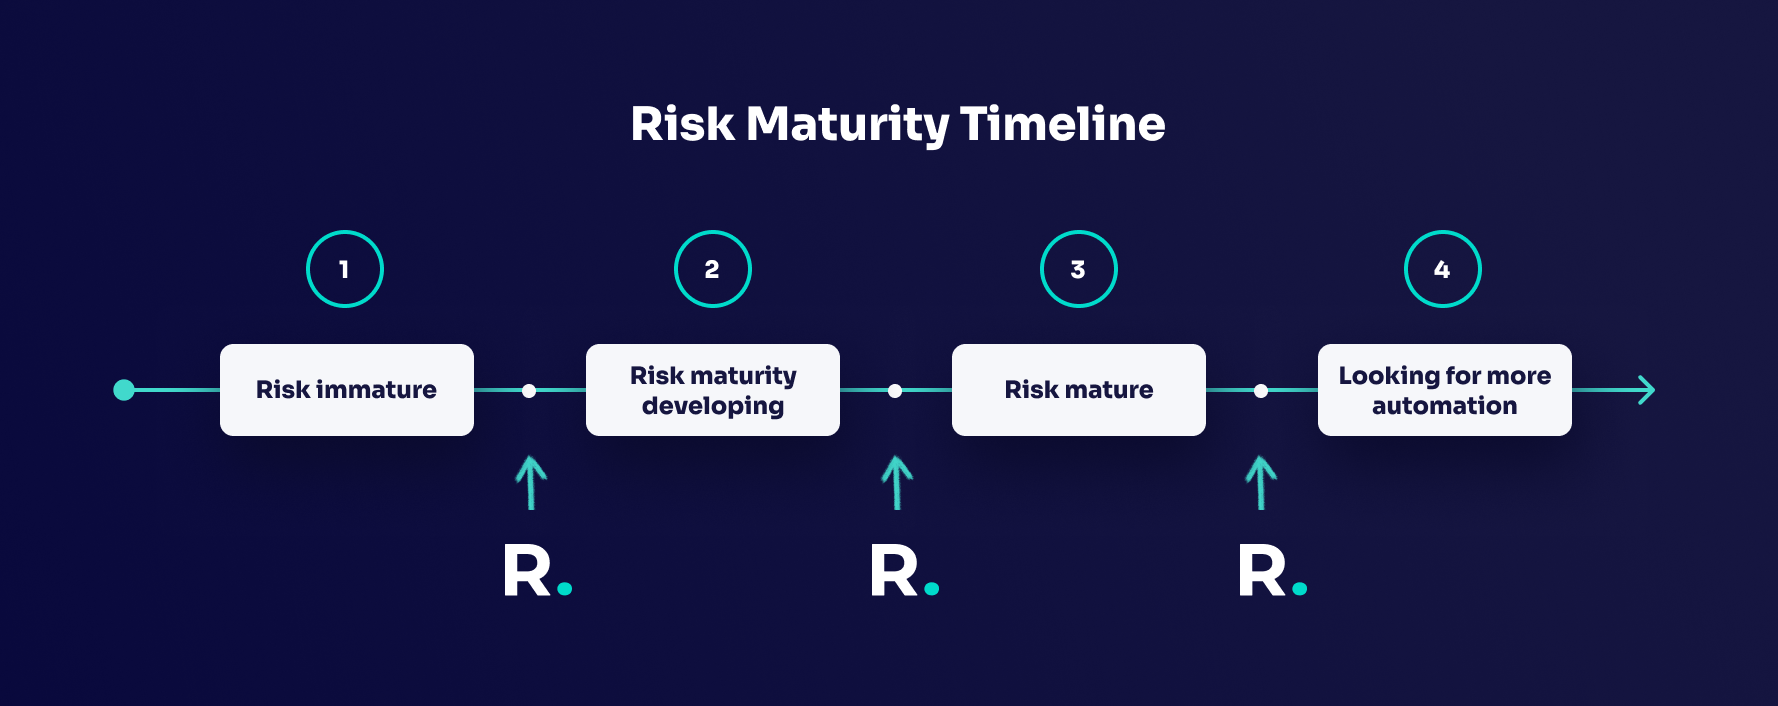 Timeline showing risk maturity from 'Risk immature' to 'Looking for more automation'. Risk management software can slot in anywhere in the journey, as shown by arrows in the timeline with the RiskSmart logo.